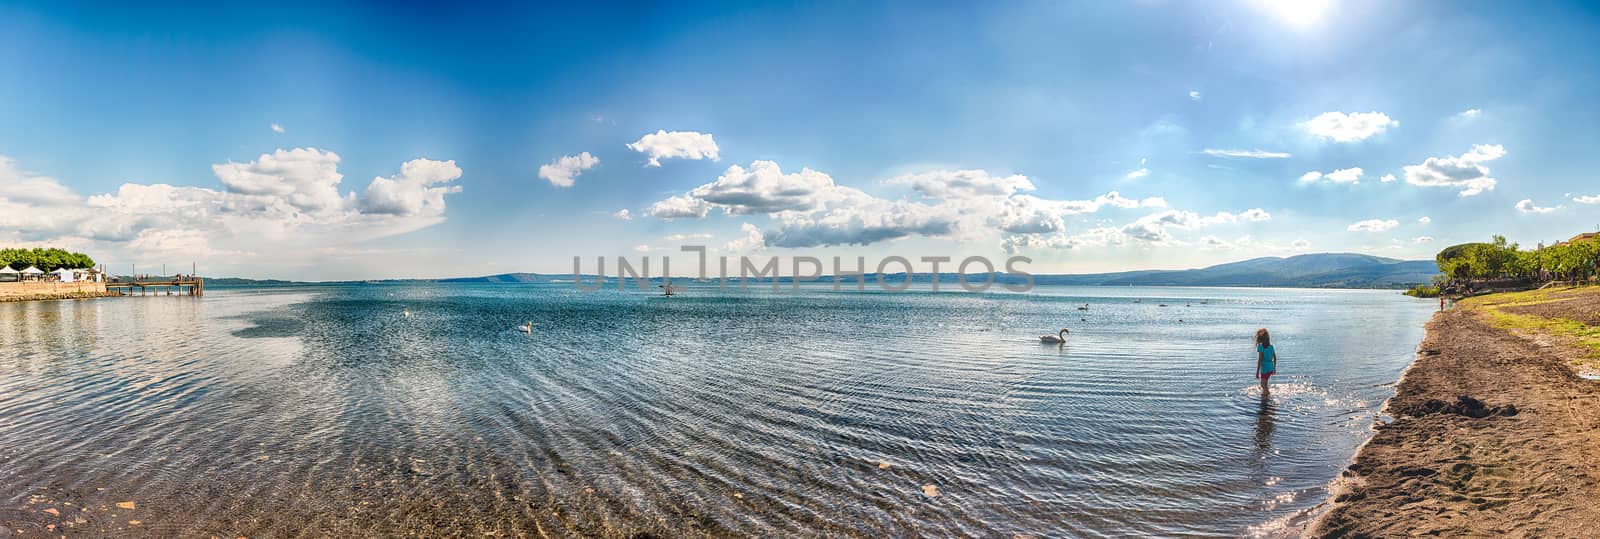 View over lake Bracciano with swans and the afternoon light by marcorubino